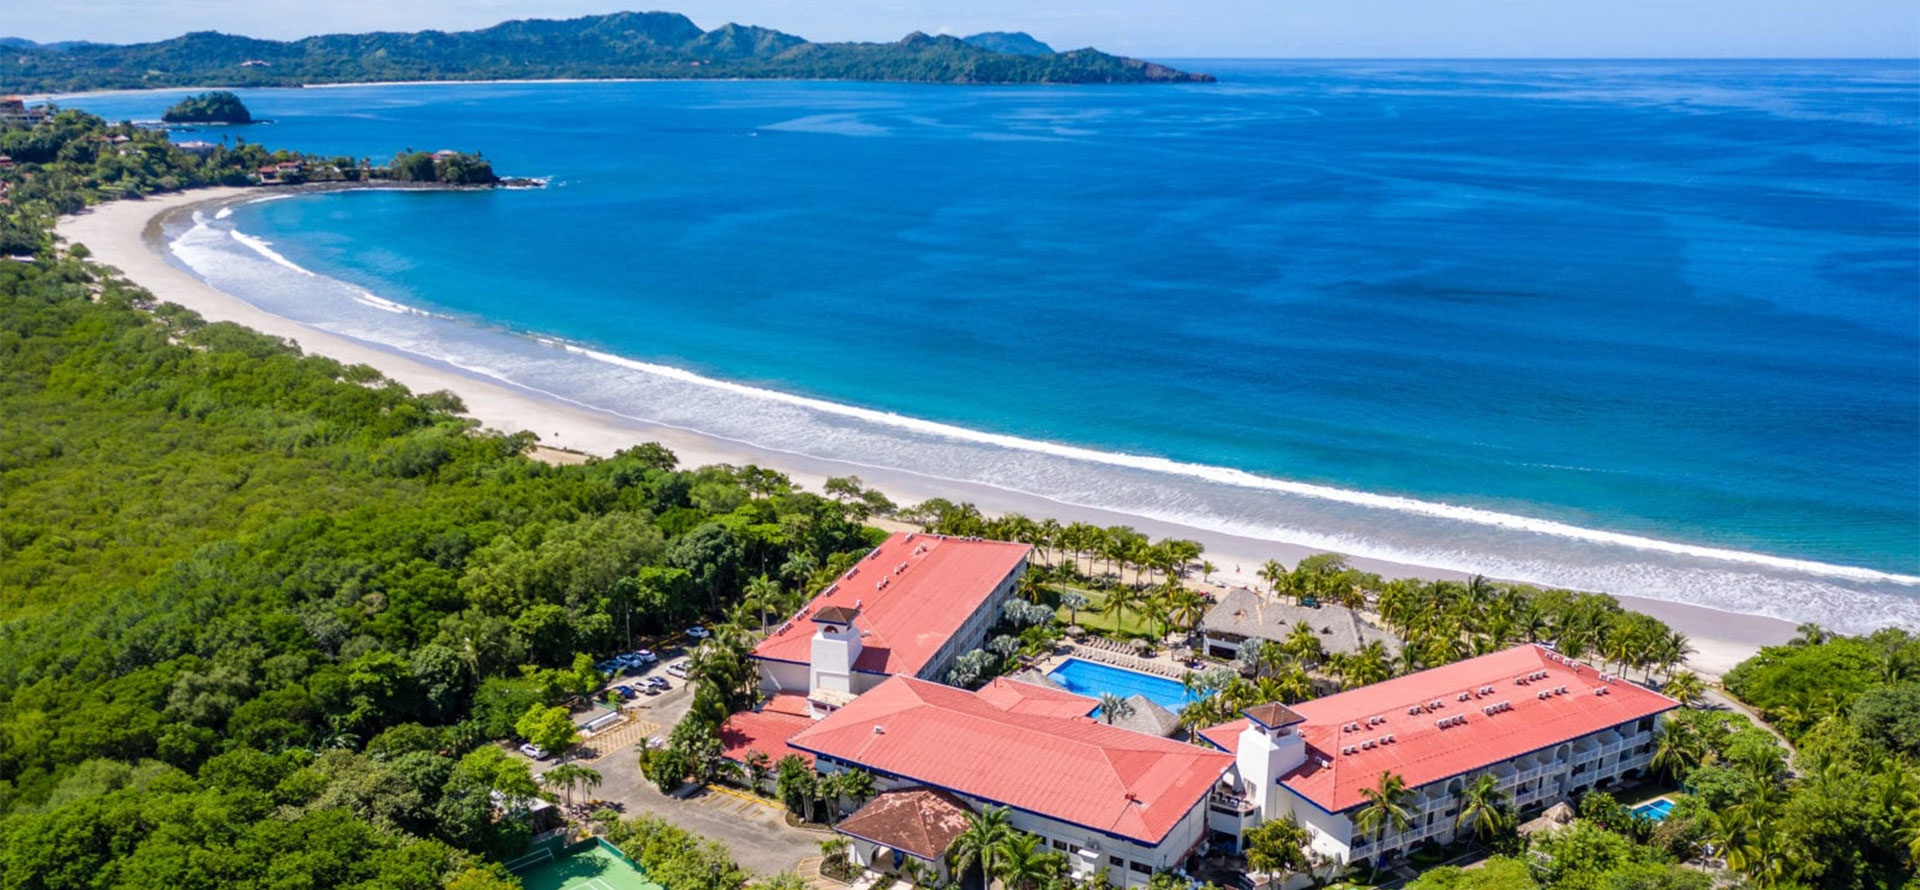 Costa rica all-inclusive adults only resort top view.